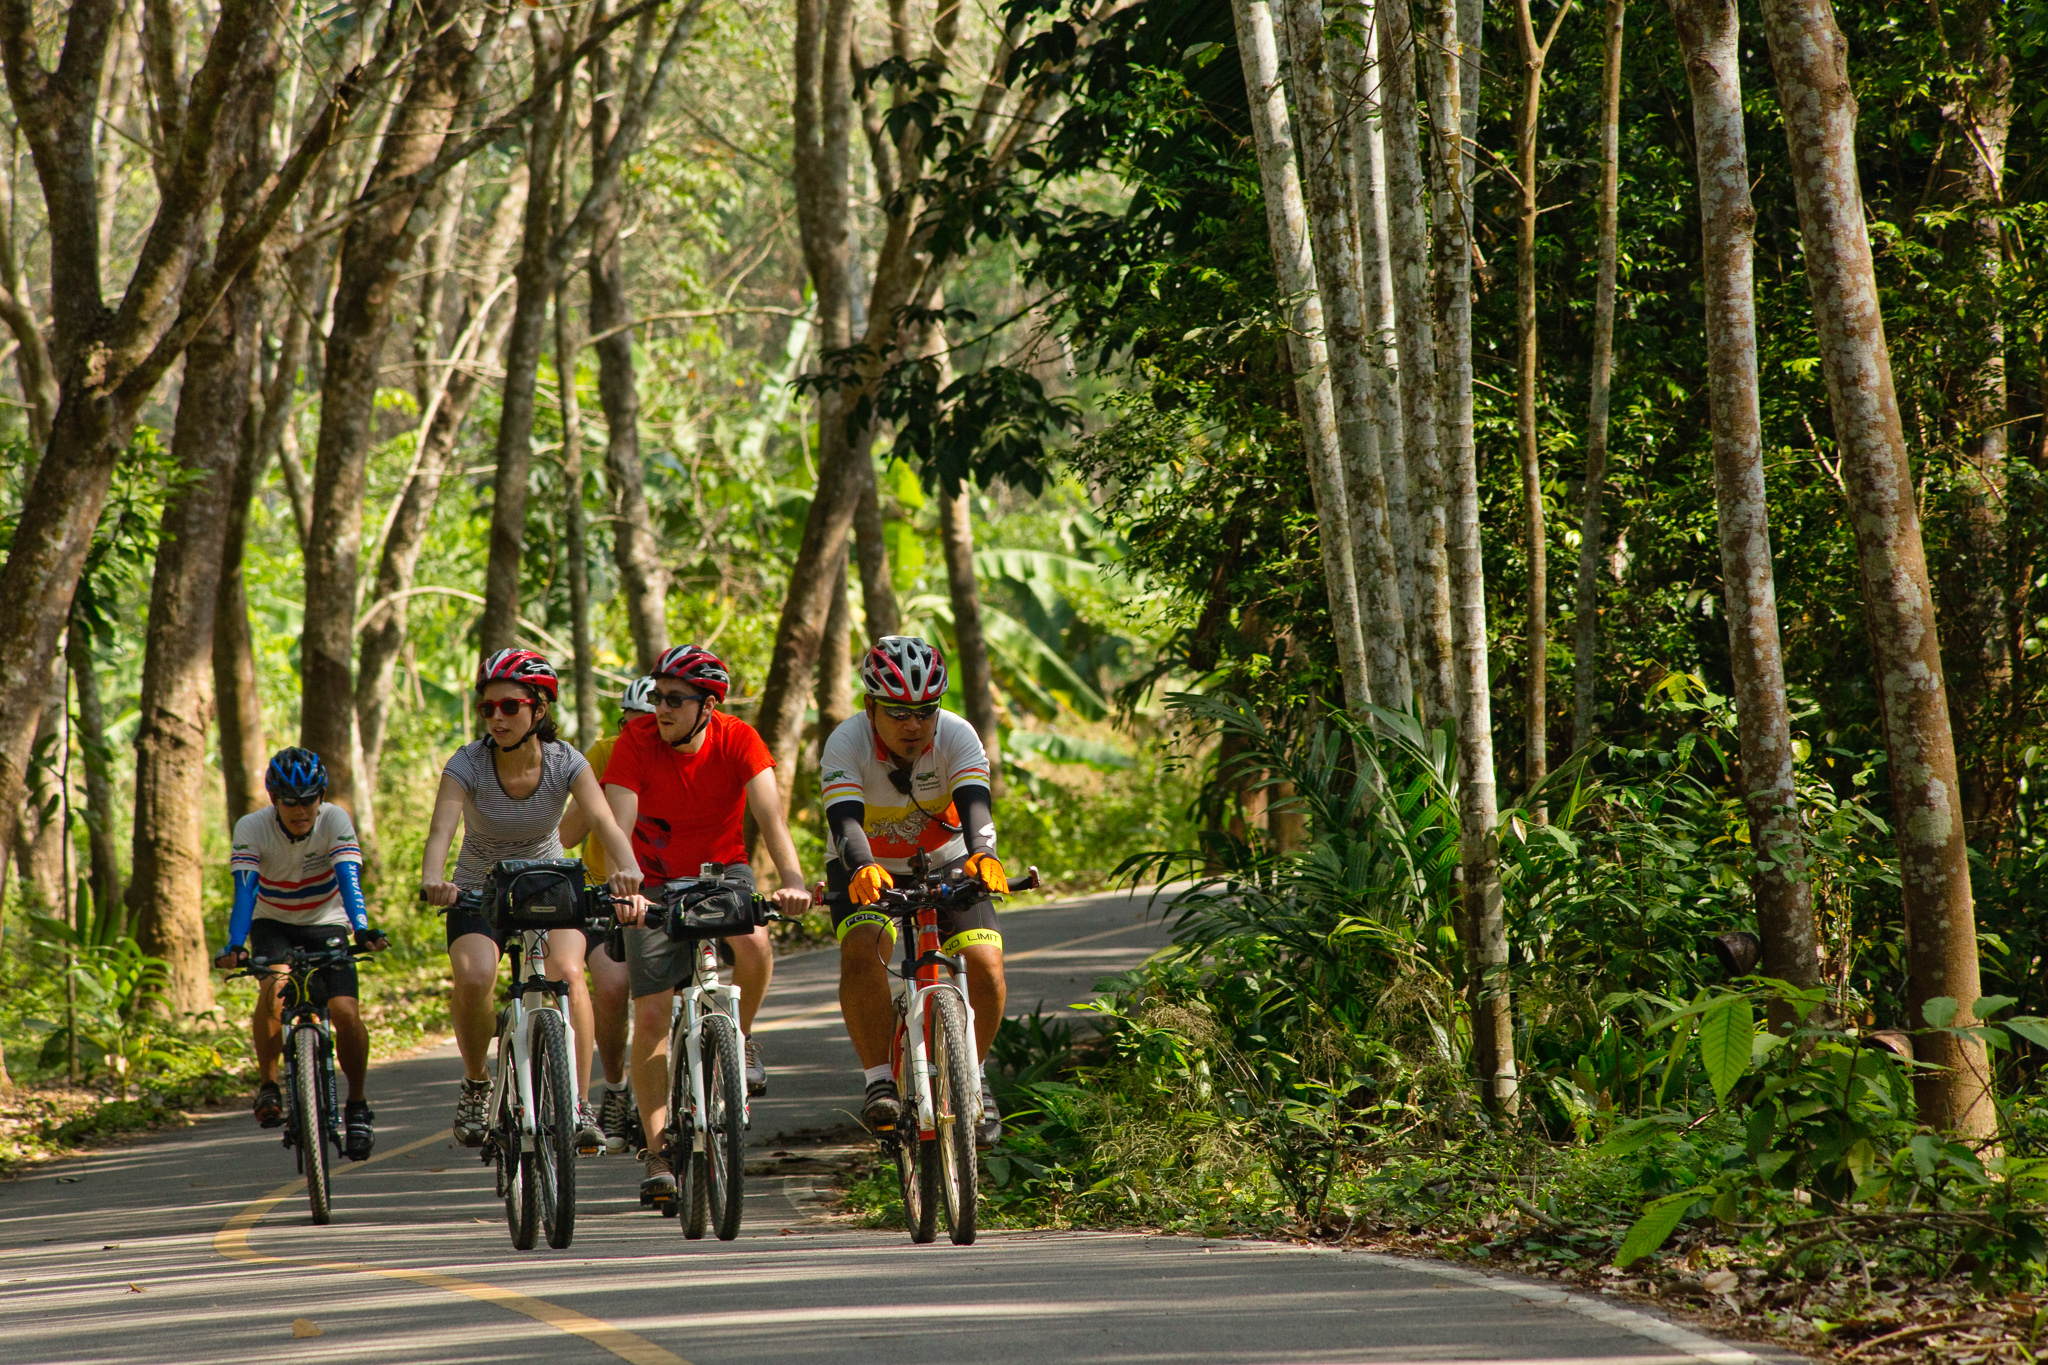 Five cyclists riding paved road through trees in Thailand